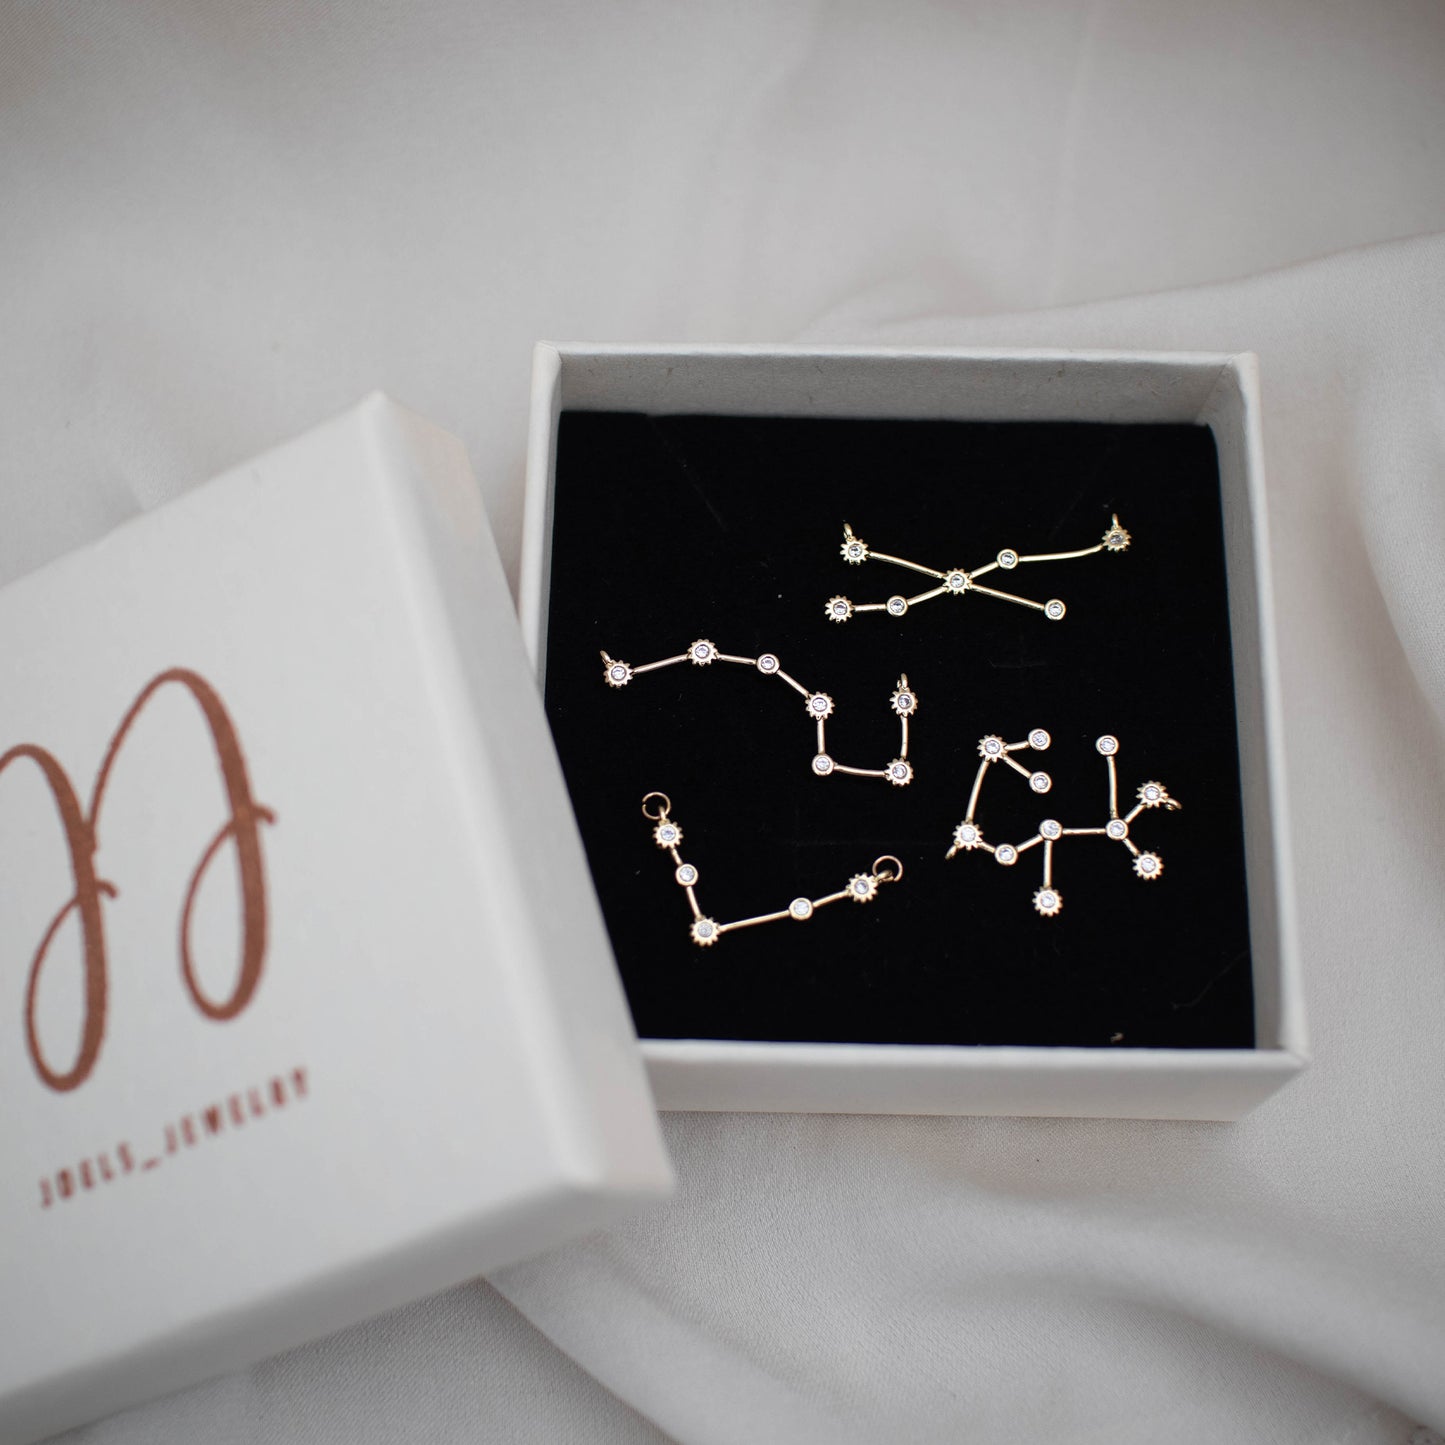 The showcase photos of different zodiac constellation charm.